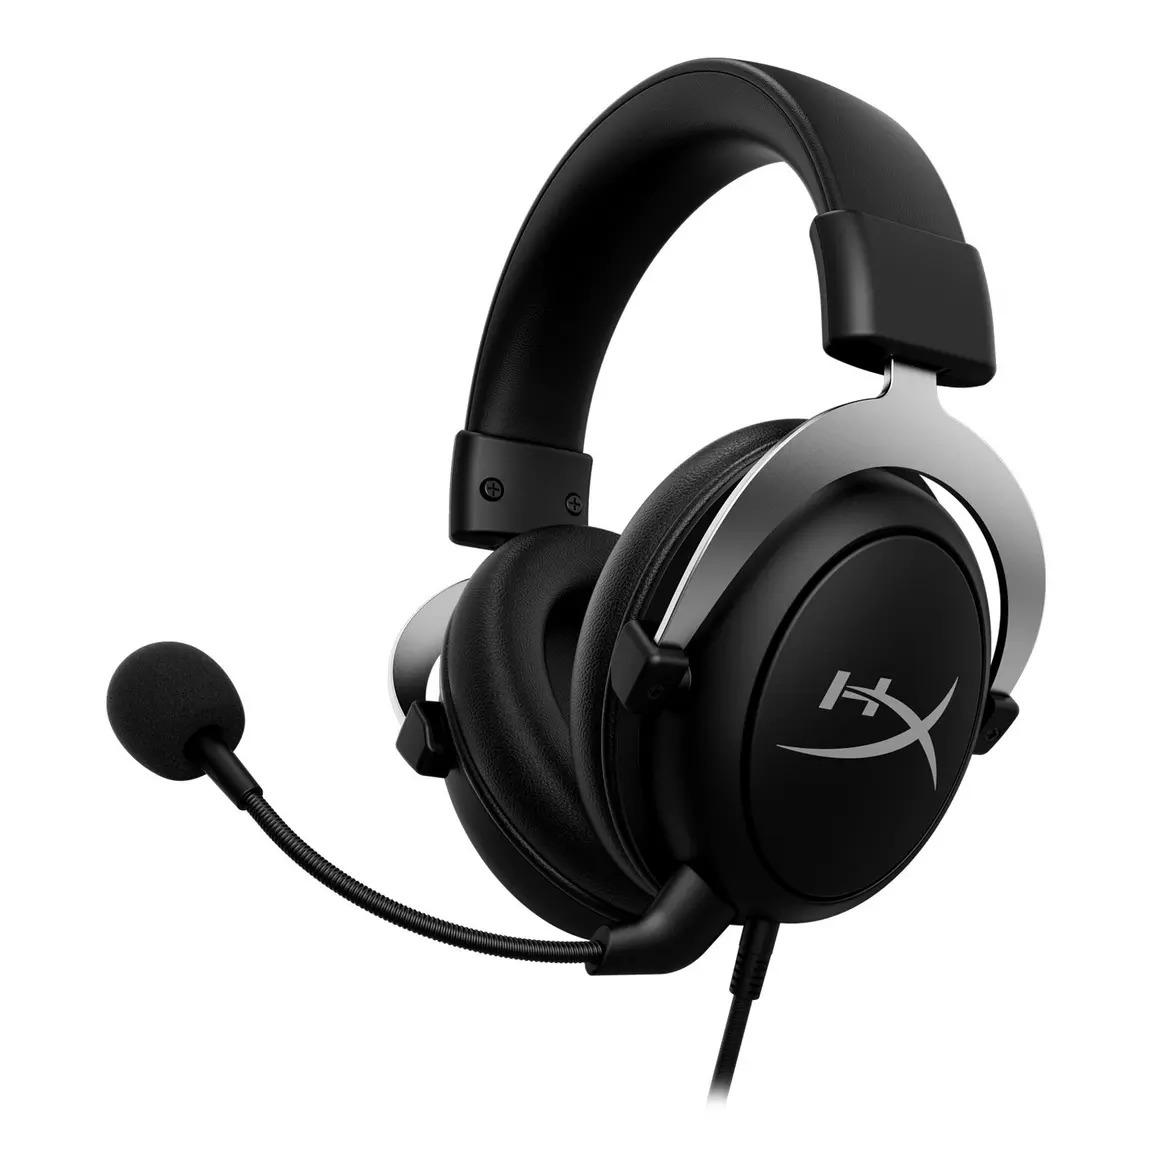 HyperX CloudX Xbox Licensed Gaming Headset for $19.99